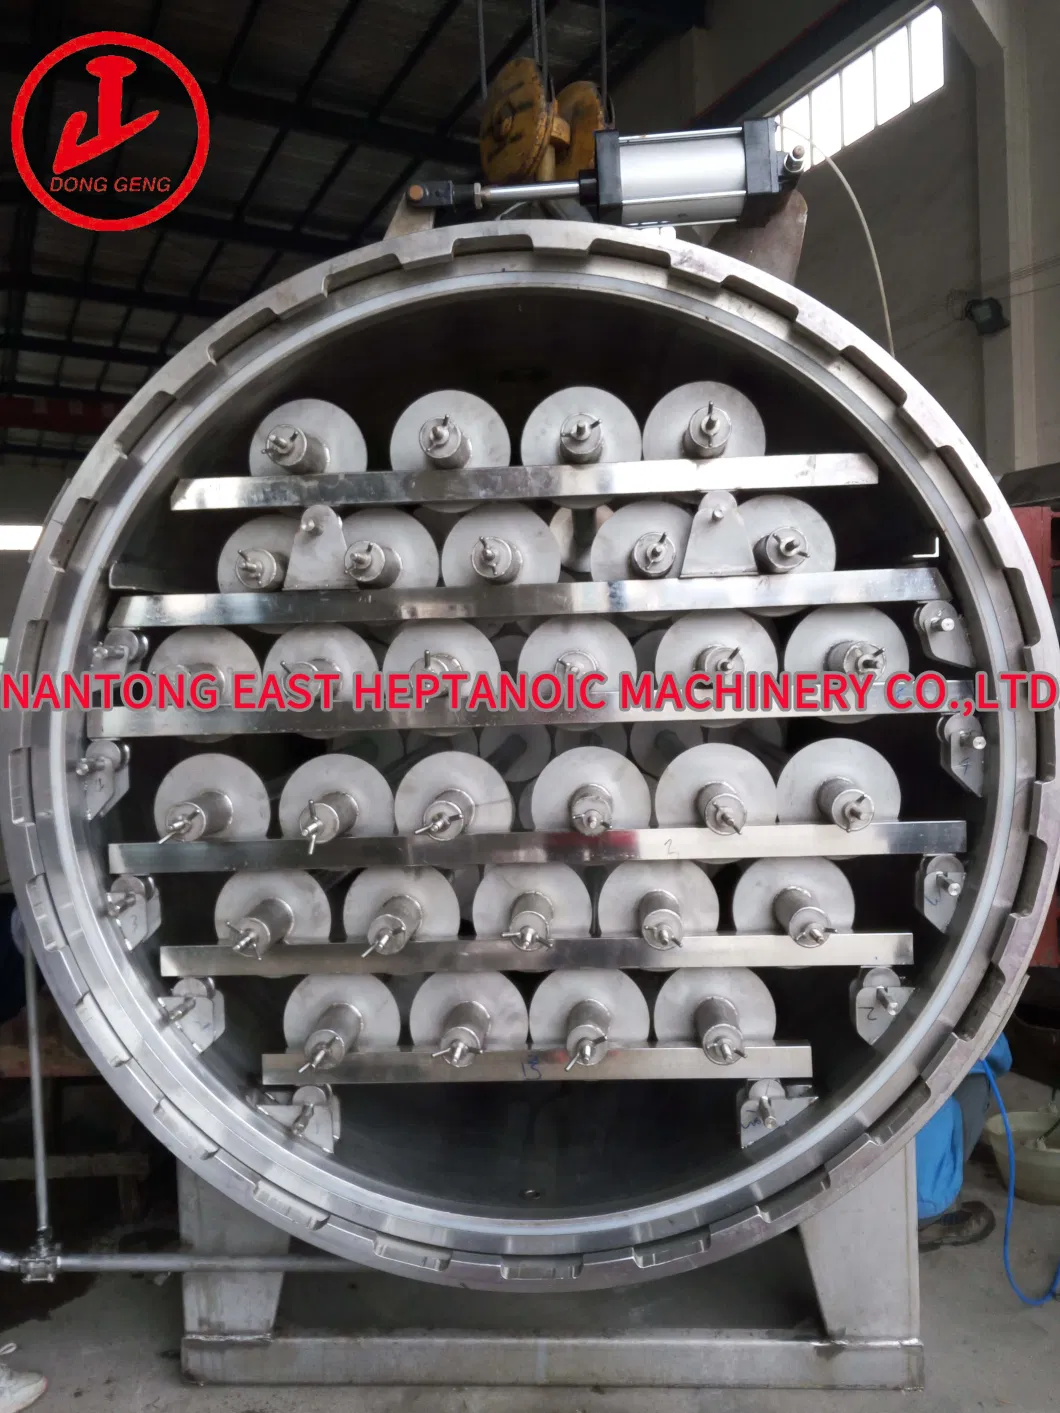 Cloth Dyeing and Finishing Machine Cloth Storage Tank Can Put Fabric Drive Can Lift The Drum